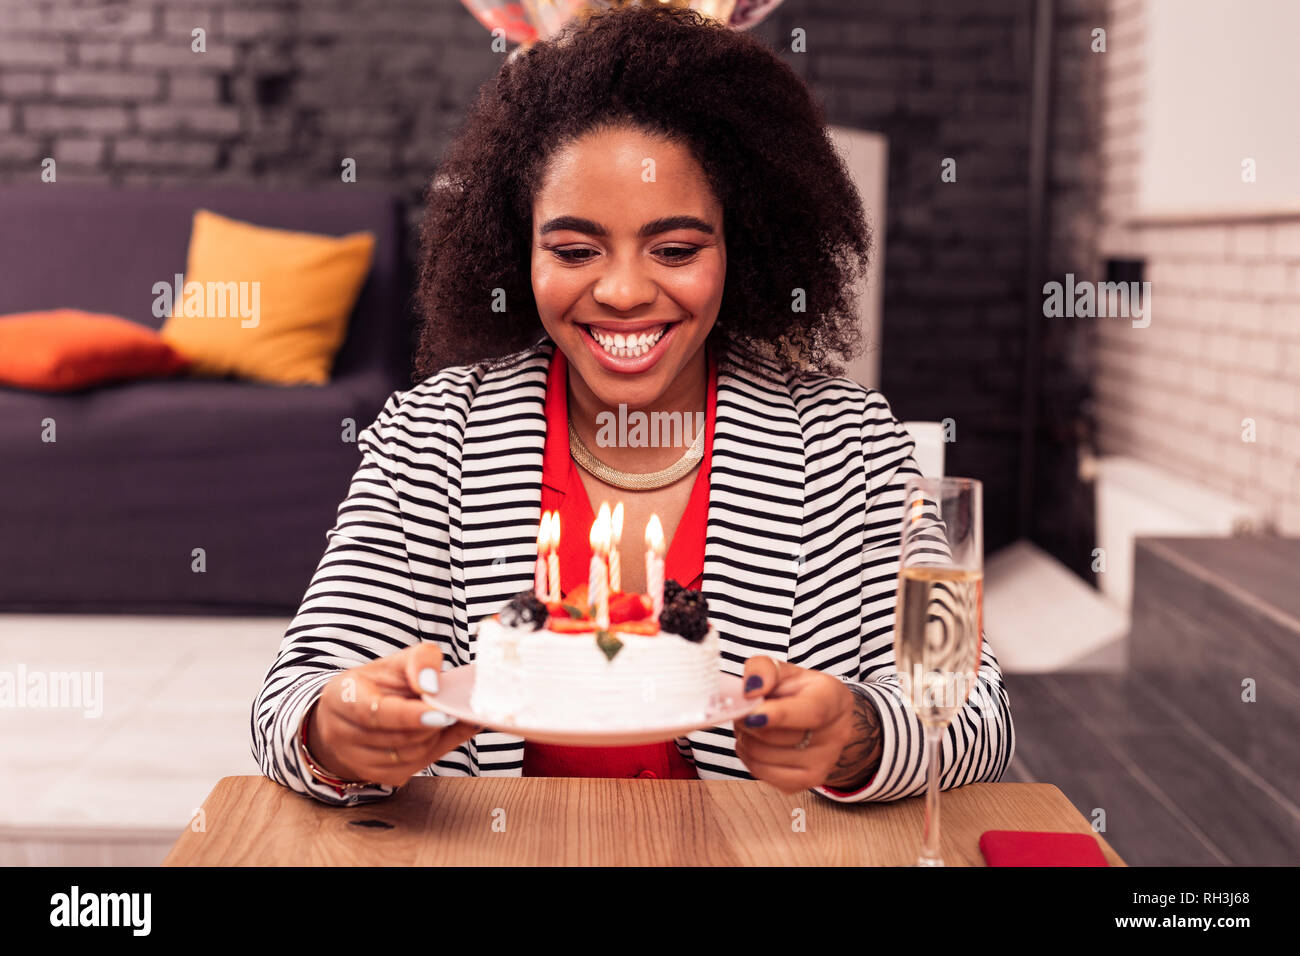 Joyful attractive woman holding a plate with cake Stock Photo